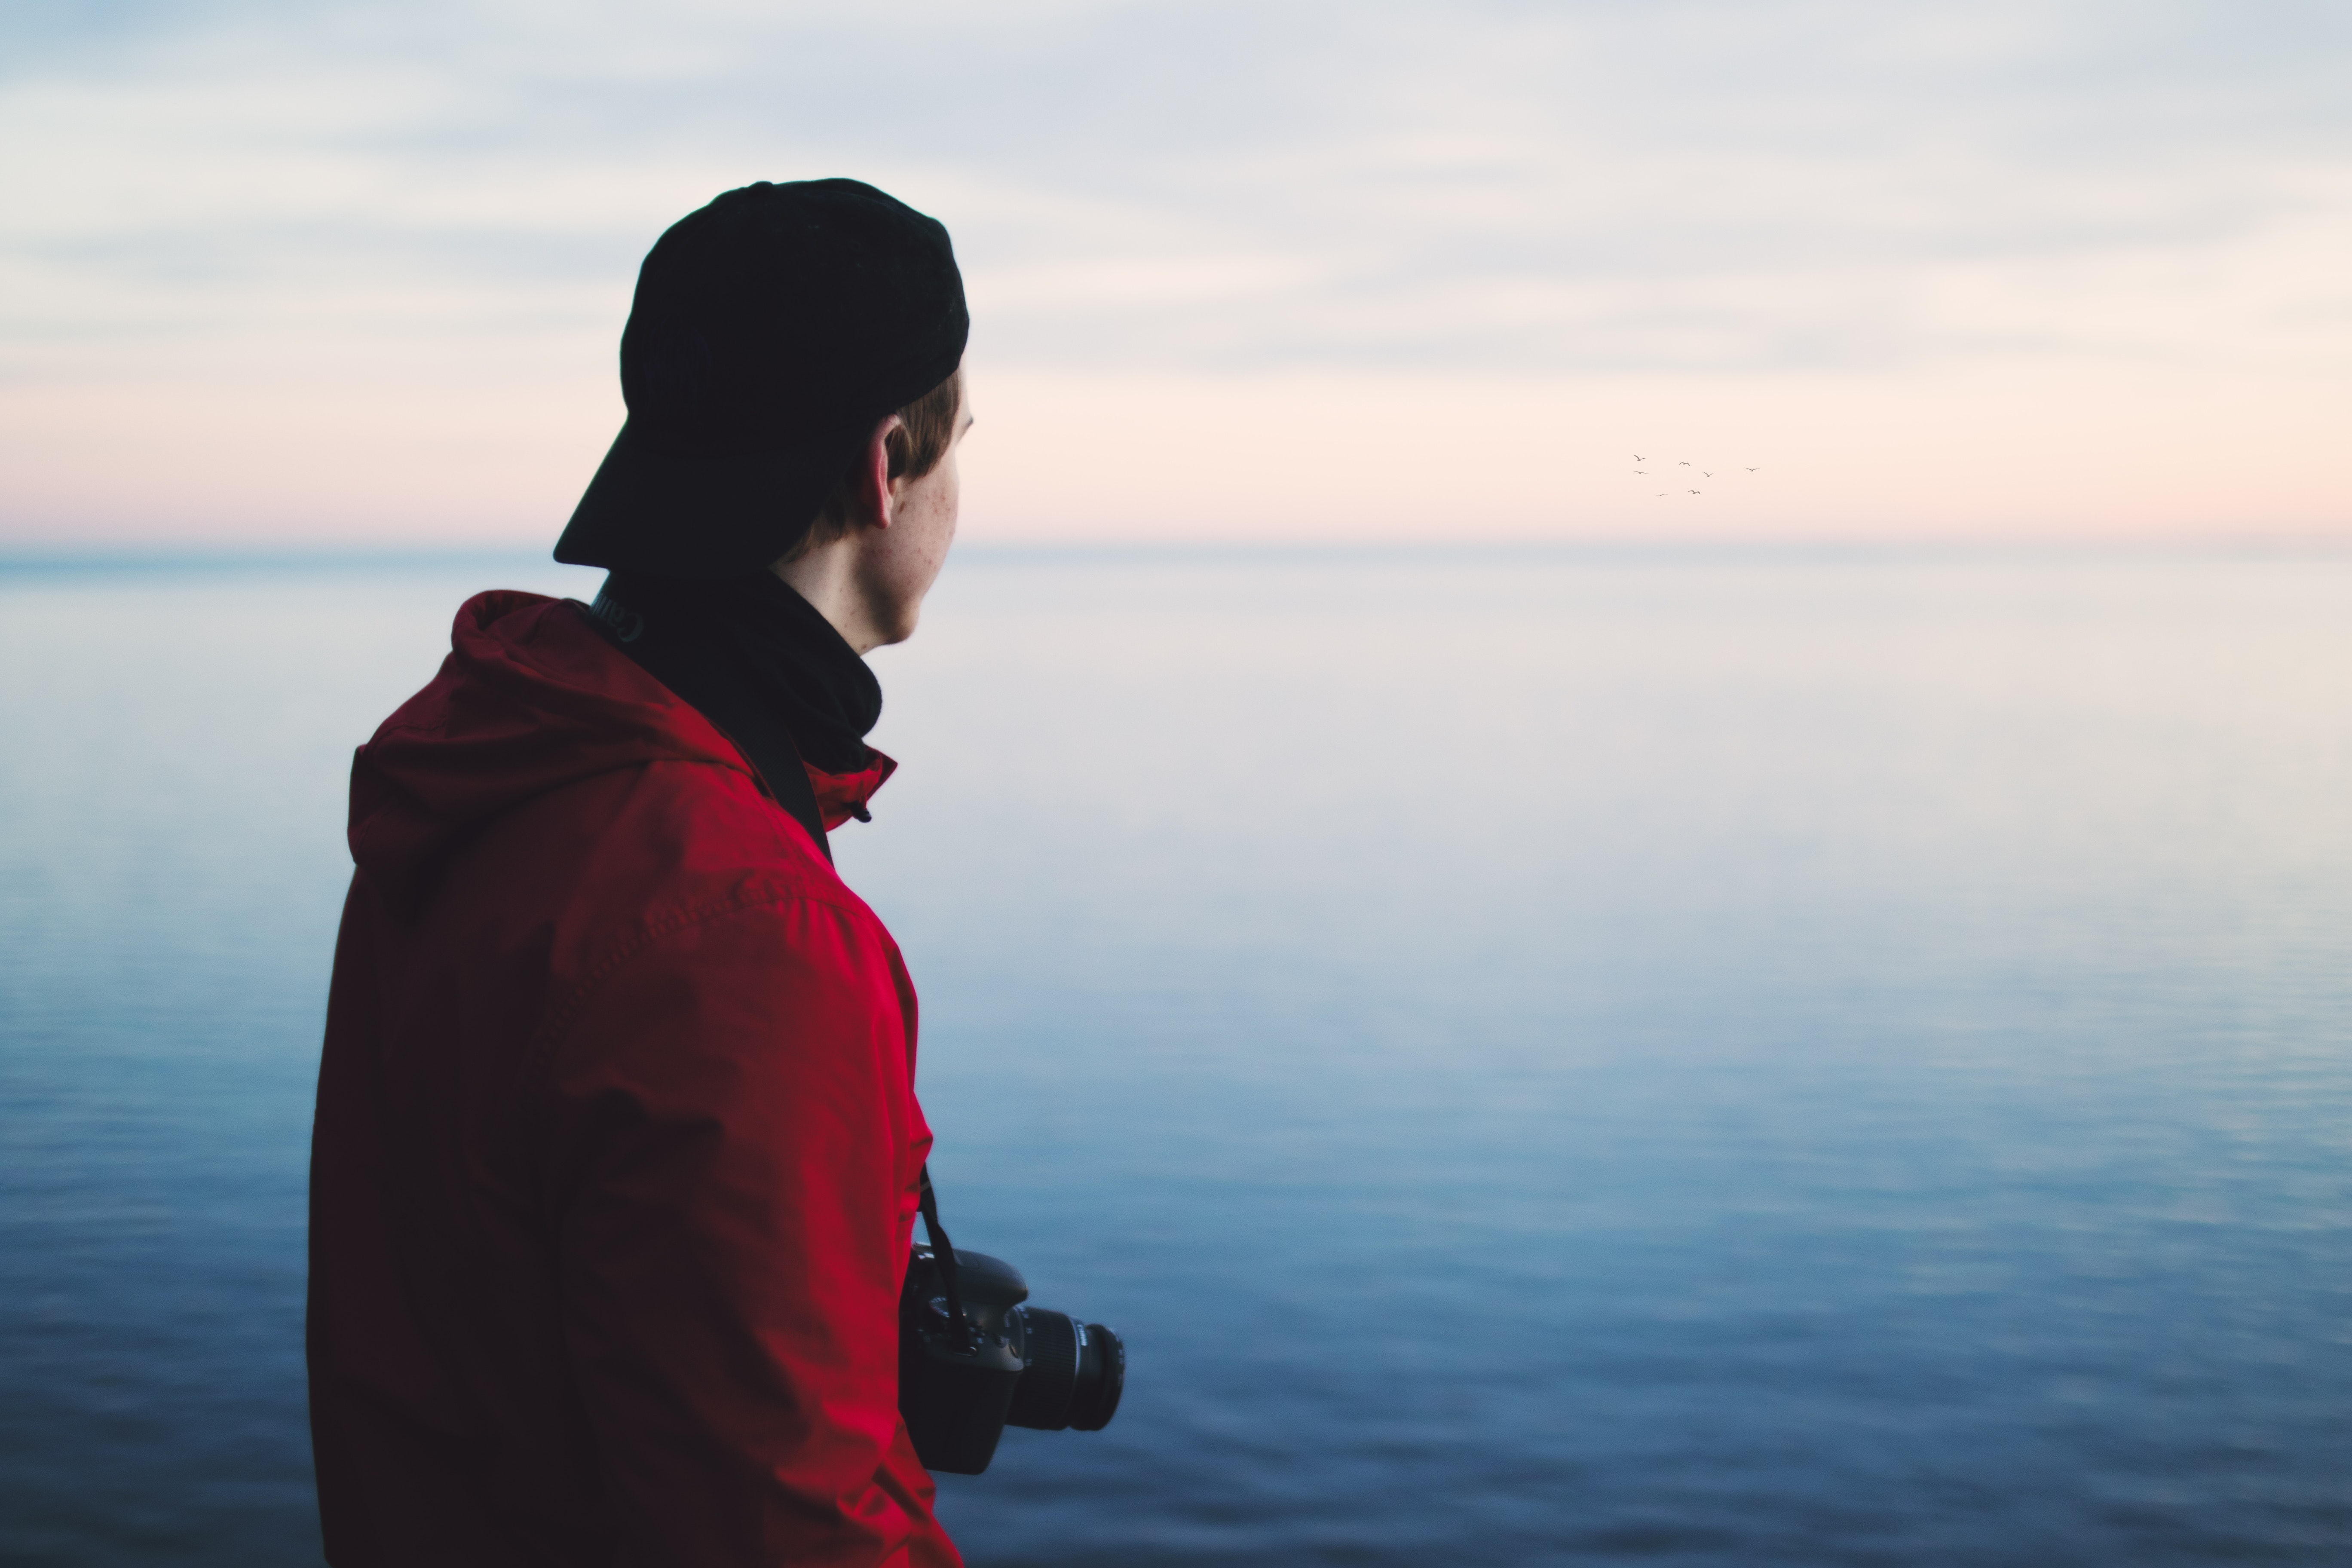 Man in red jacket standing near body of water photo